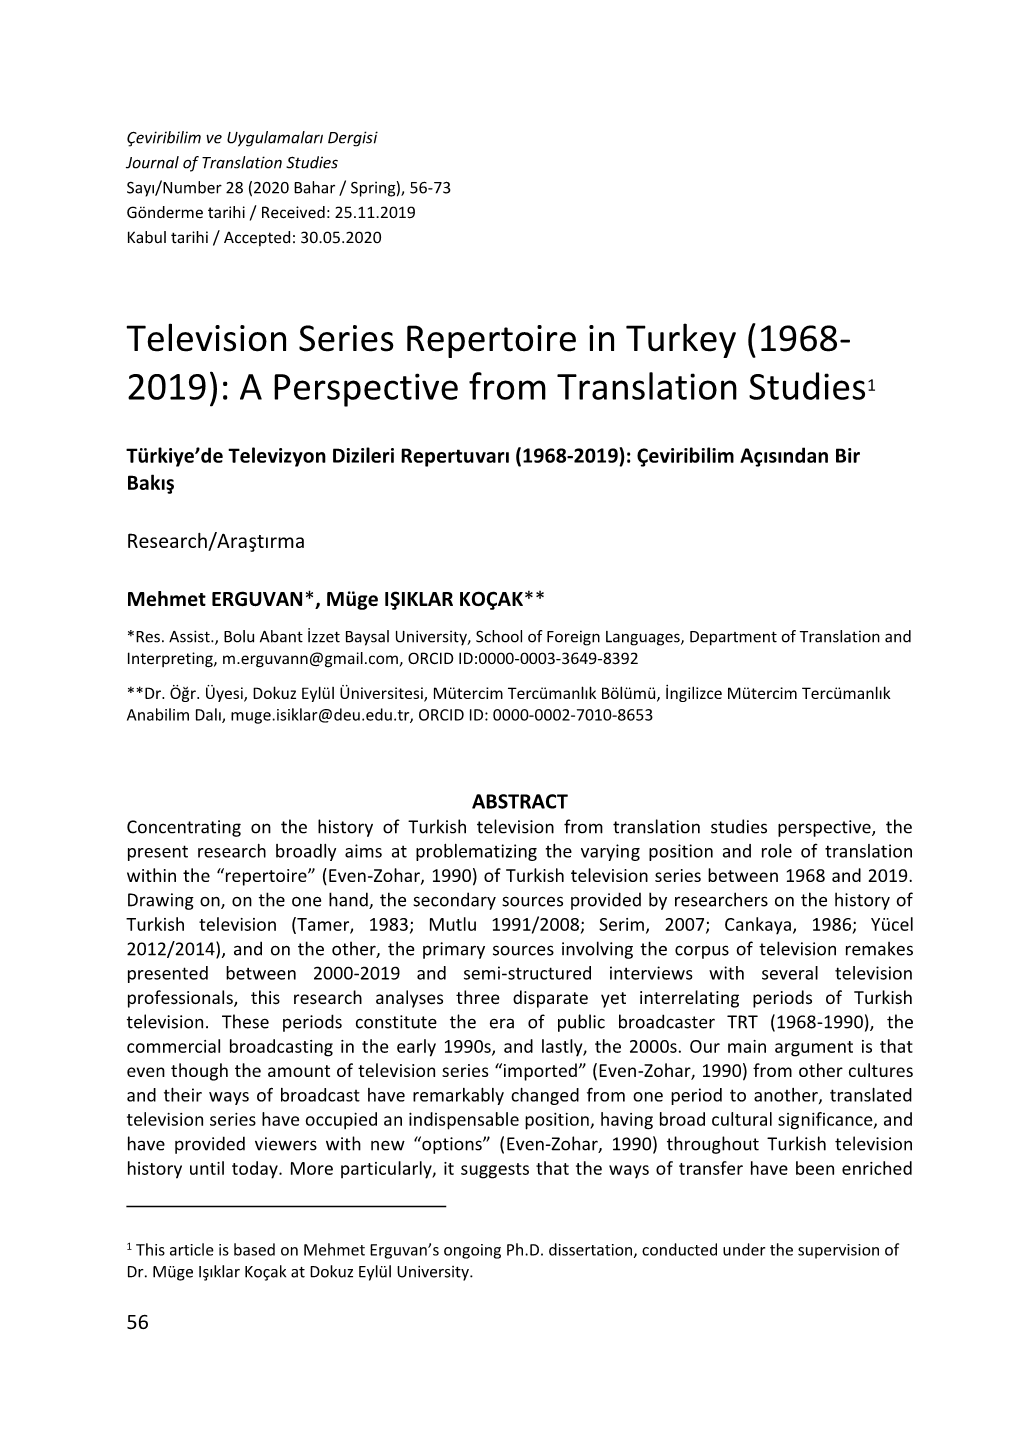 Television Series Repertoire in Turkey (1968- 2019): a Perspective from Translation Studies1